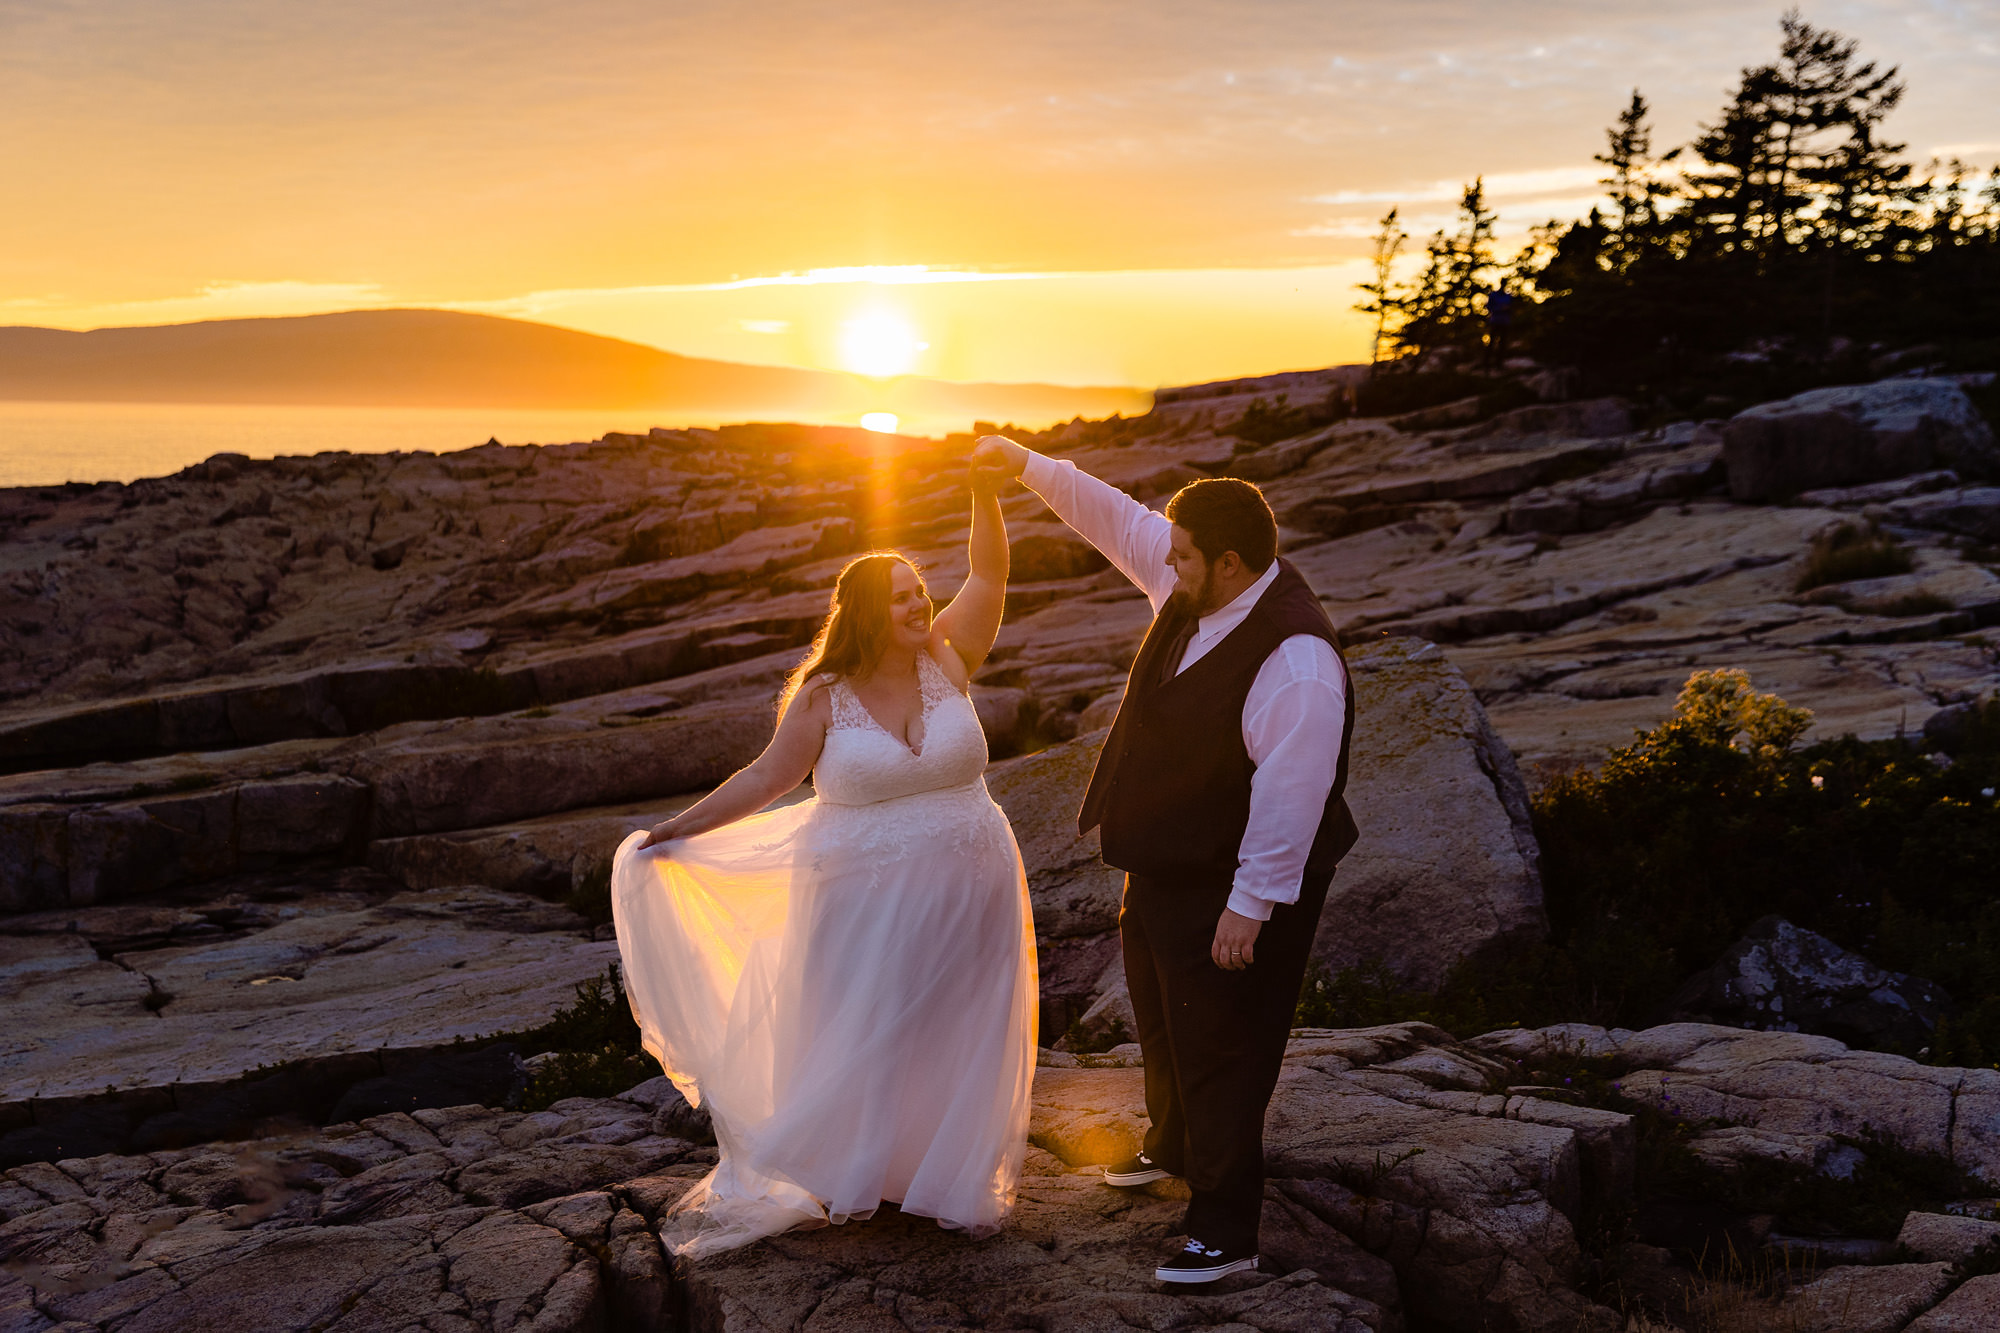 A wedding portrait at Schoodic Point at sunset.